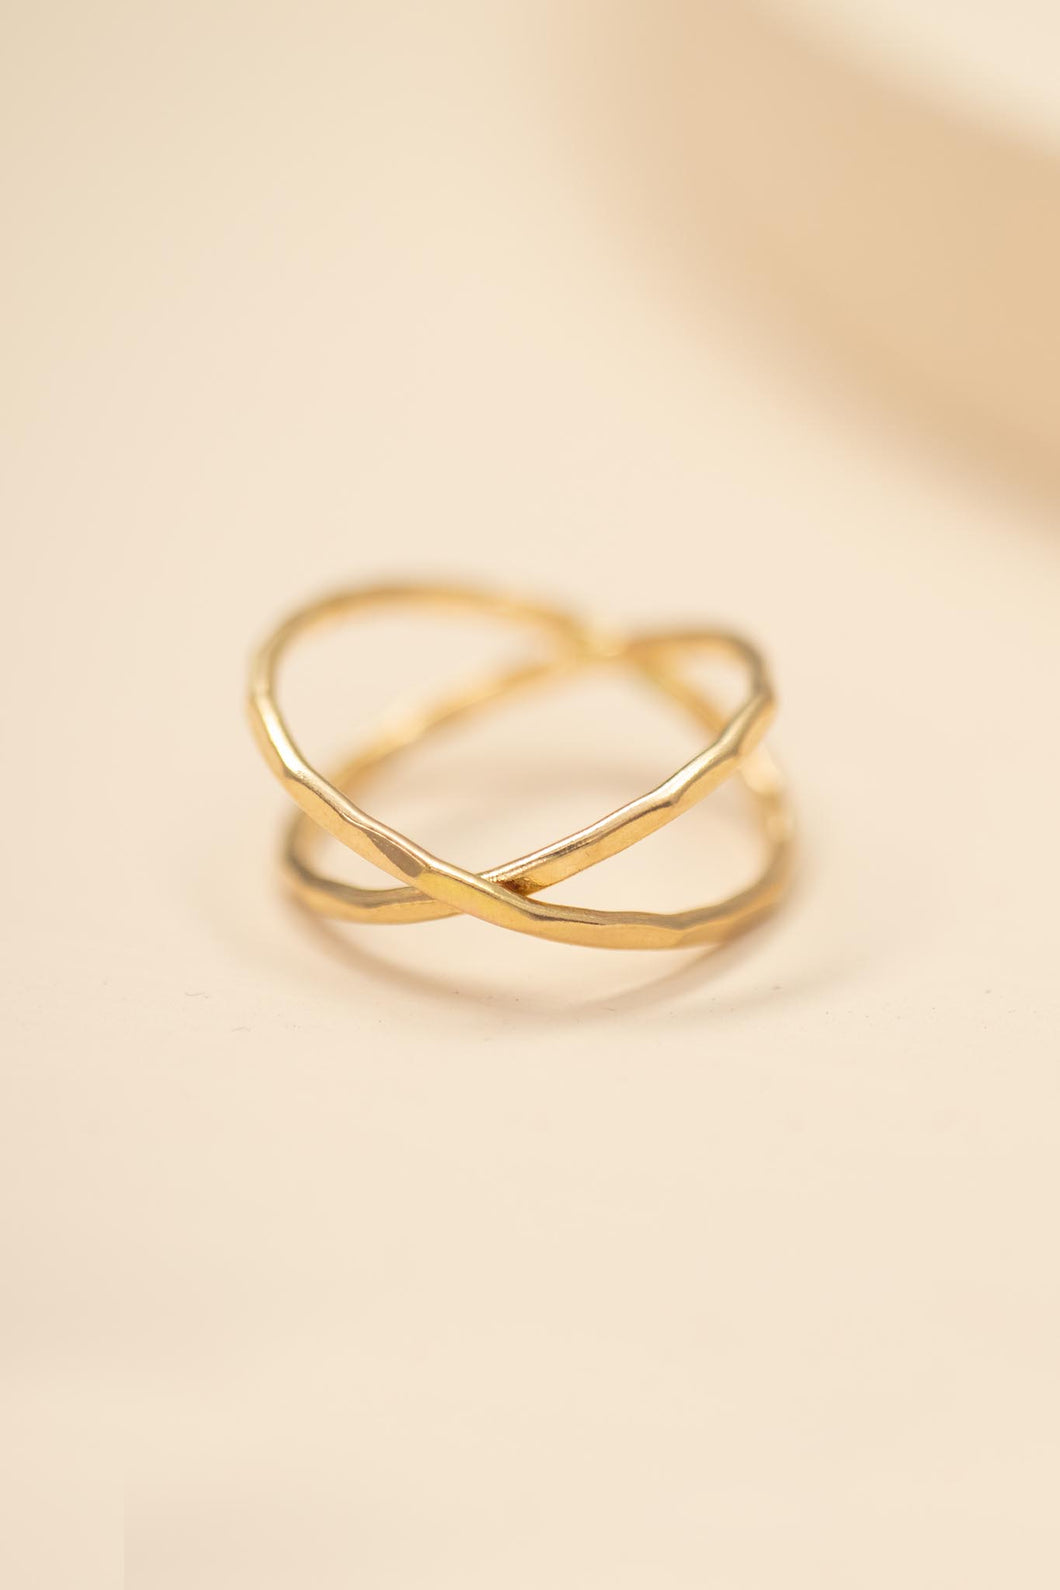 Criss-Cross Ring (Hammered)